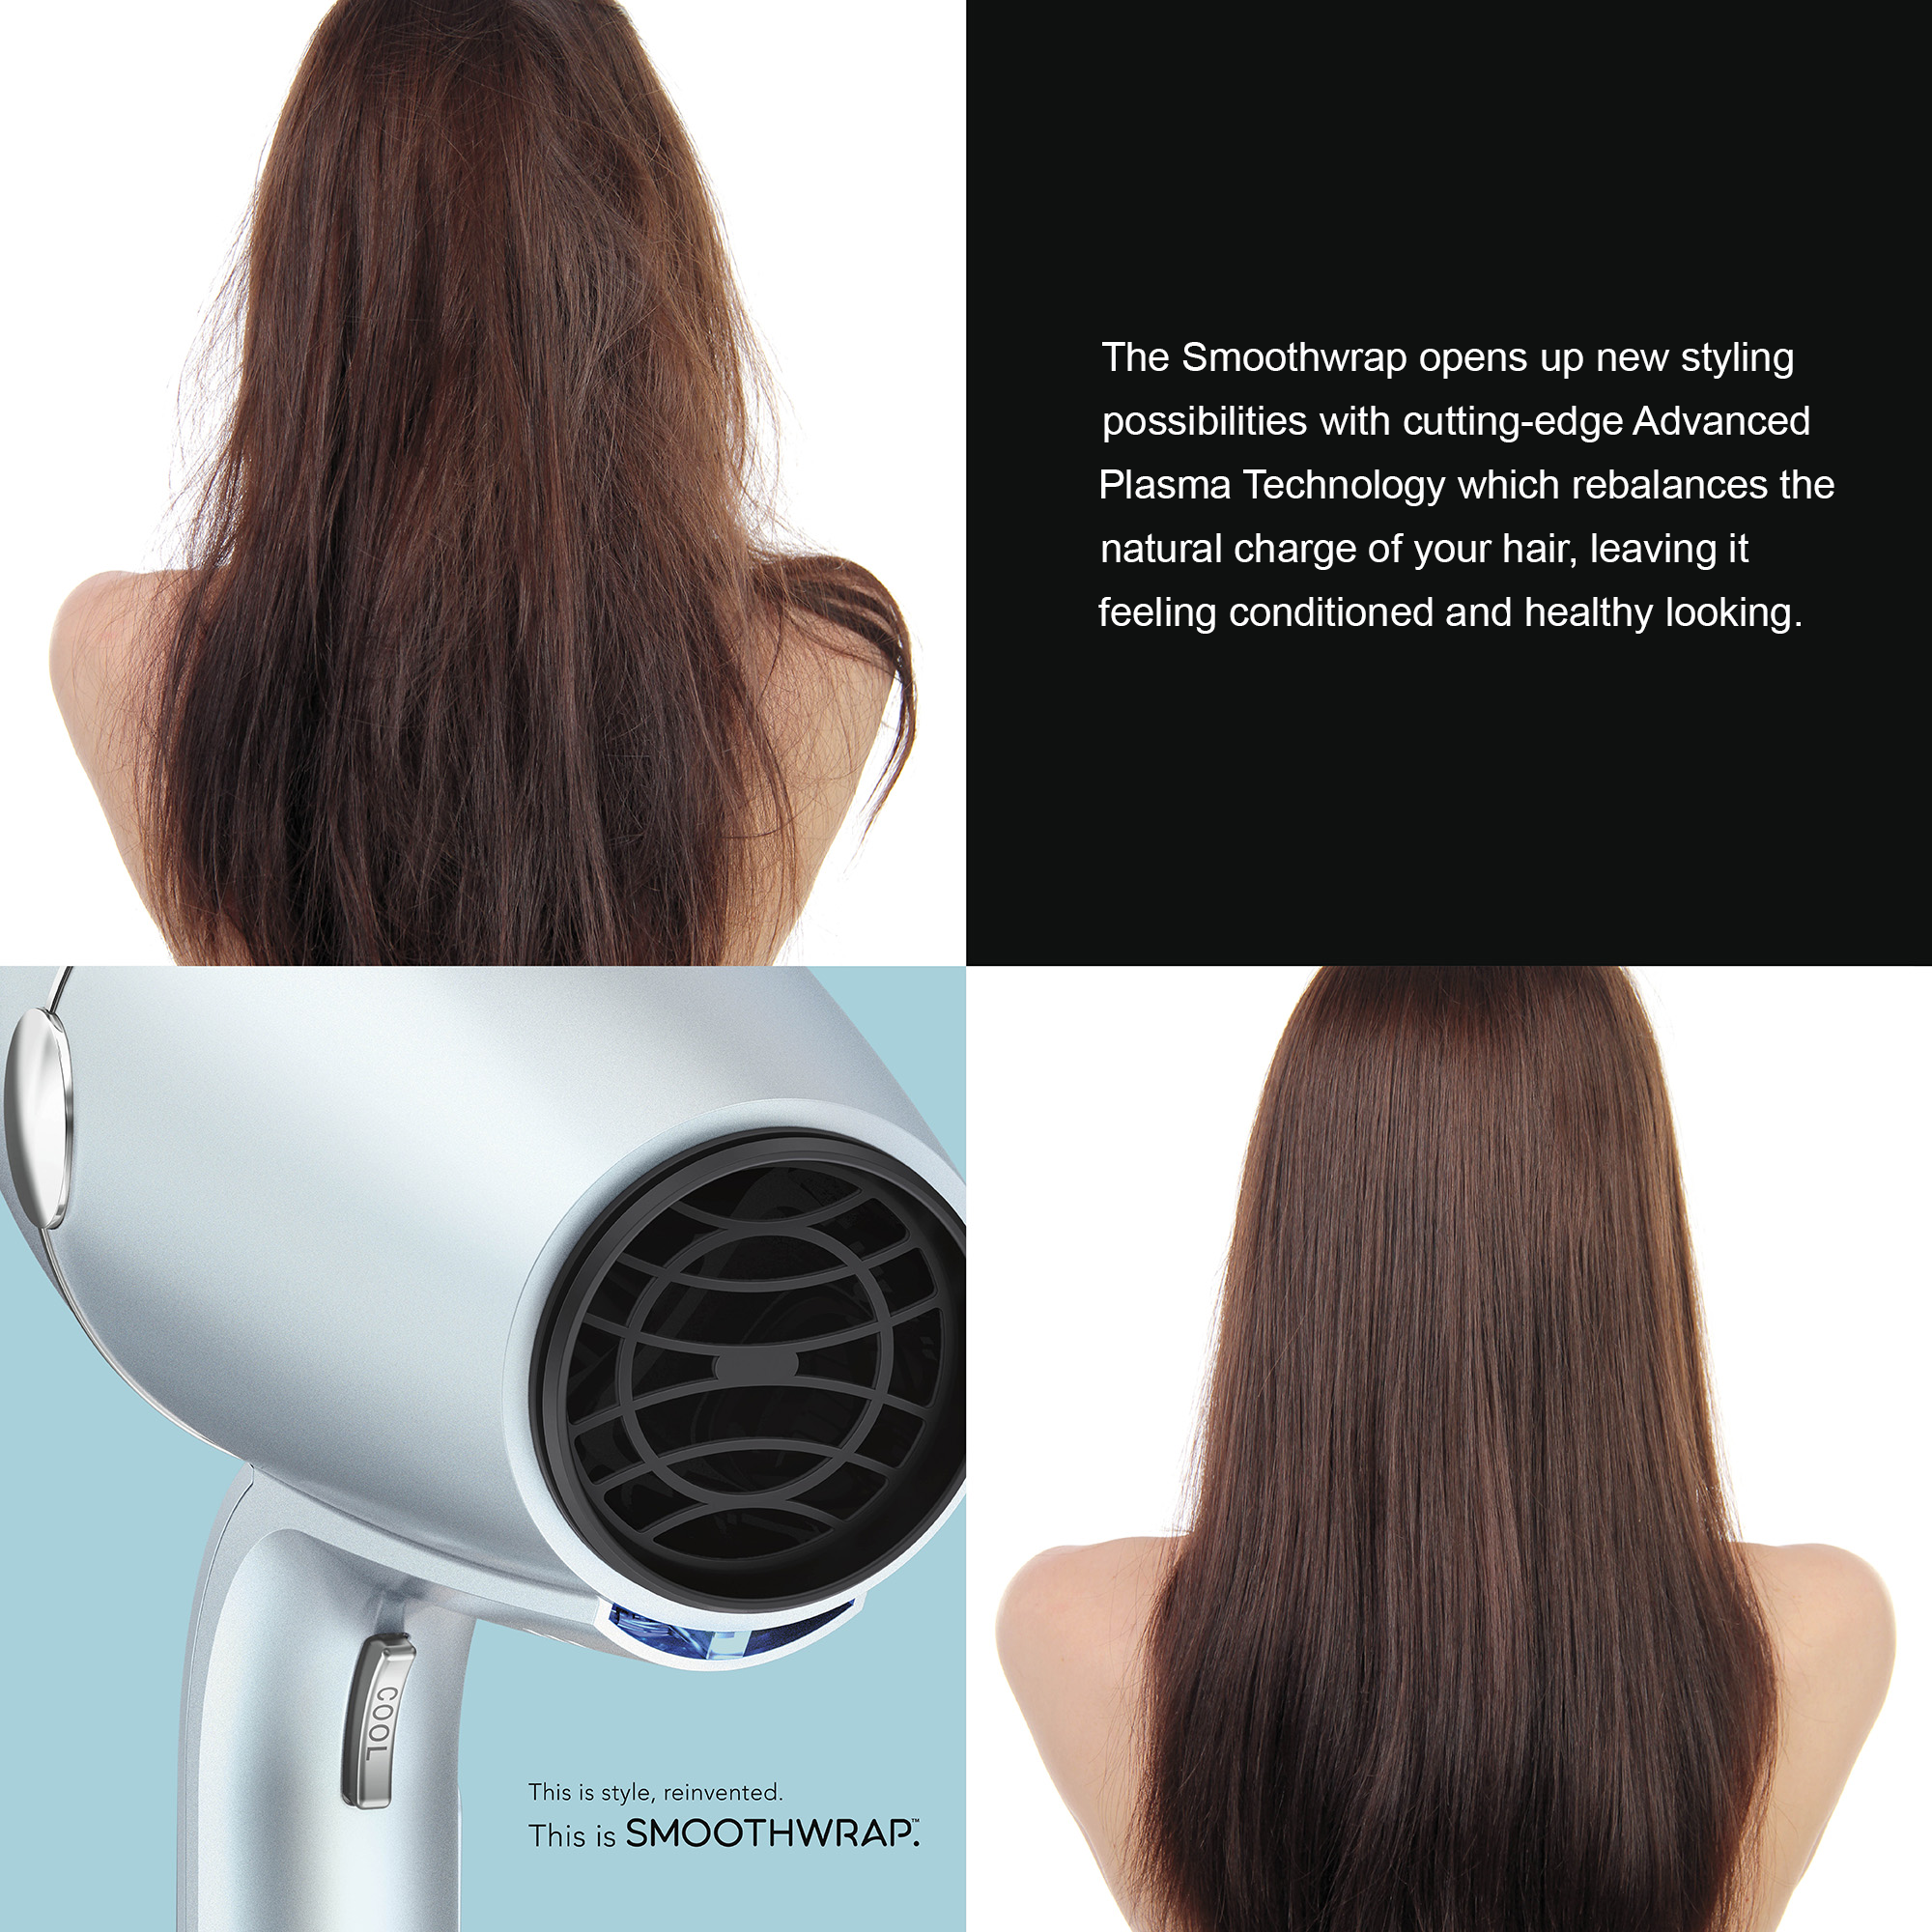 An Advanced Ionic Hair Dryer That Takes Healthy Hair to New Heights